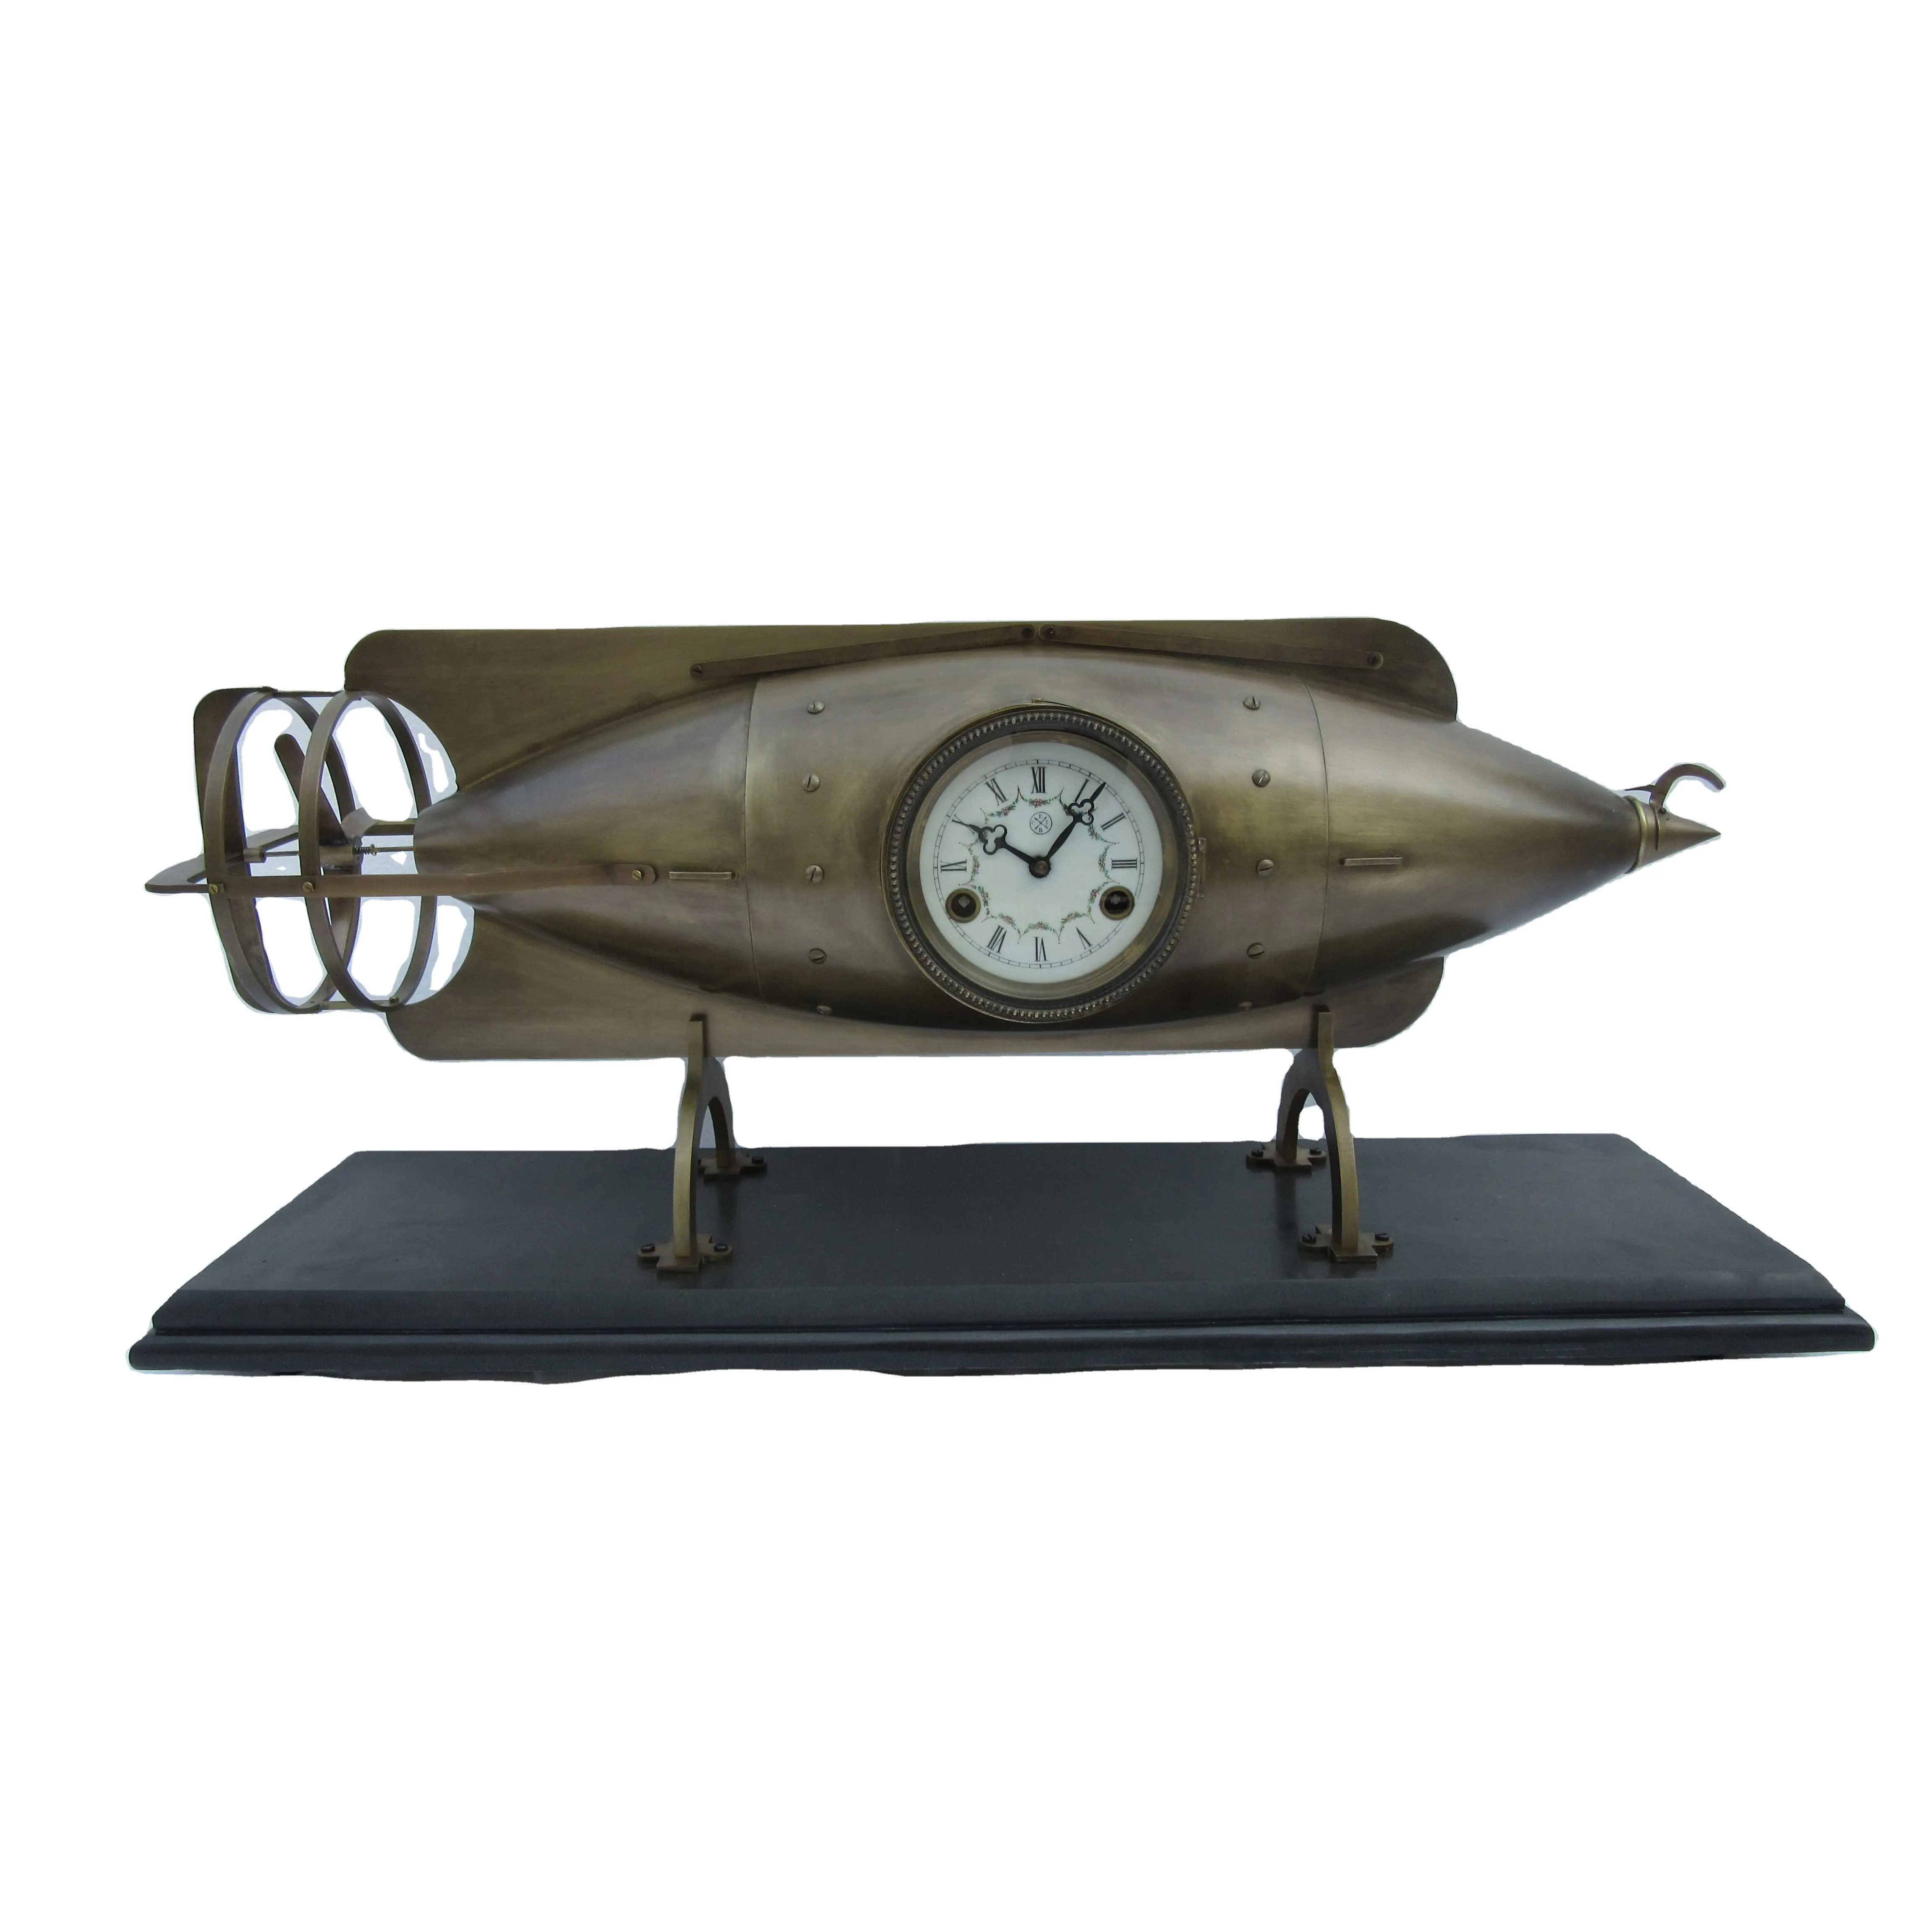 Solid Classical Antique Interesting antique brass Naval Vessel Design Mechanical Table Clock Watch for Home Decoration, Gifts